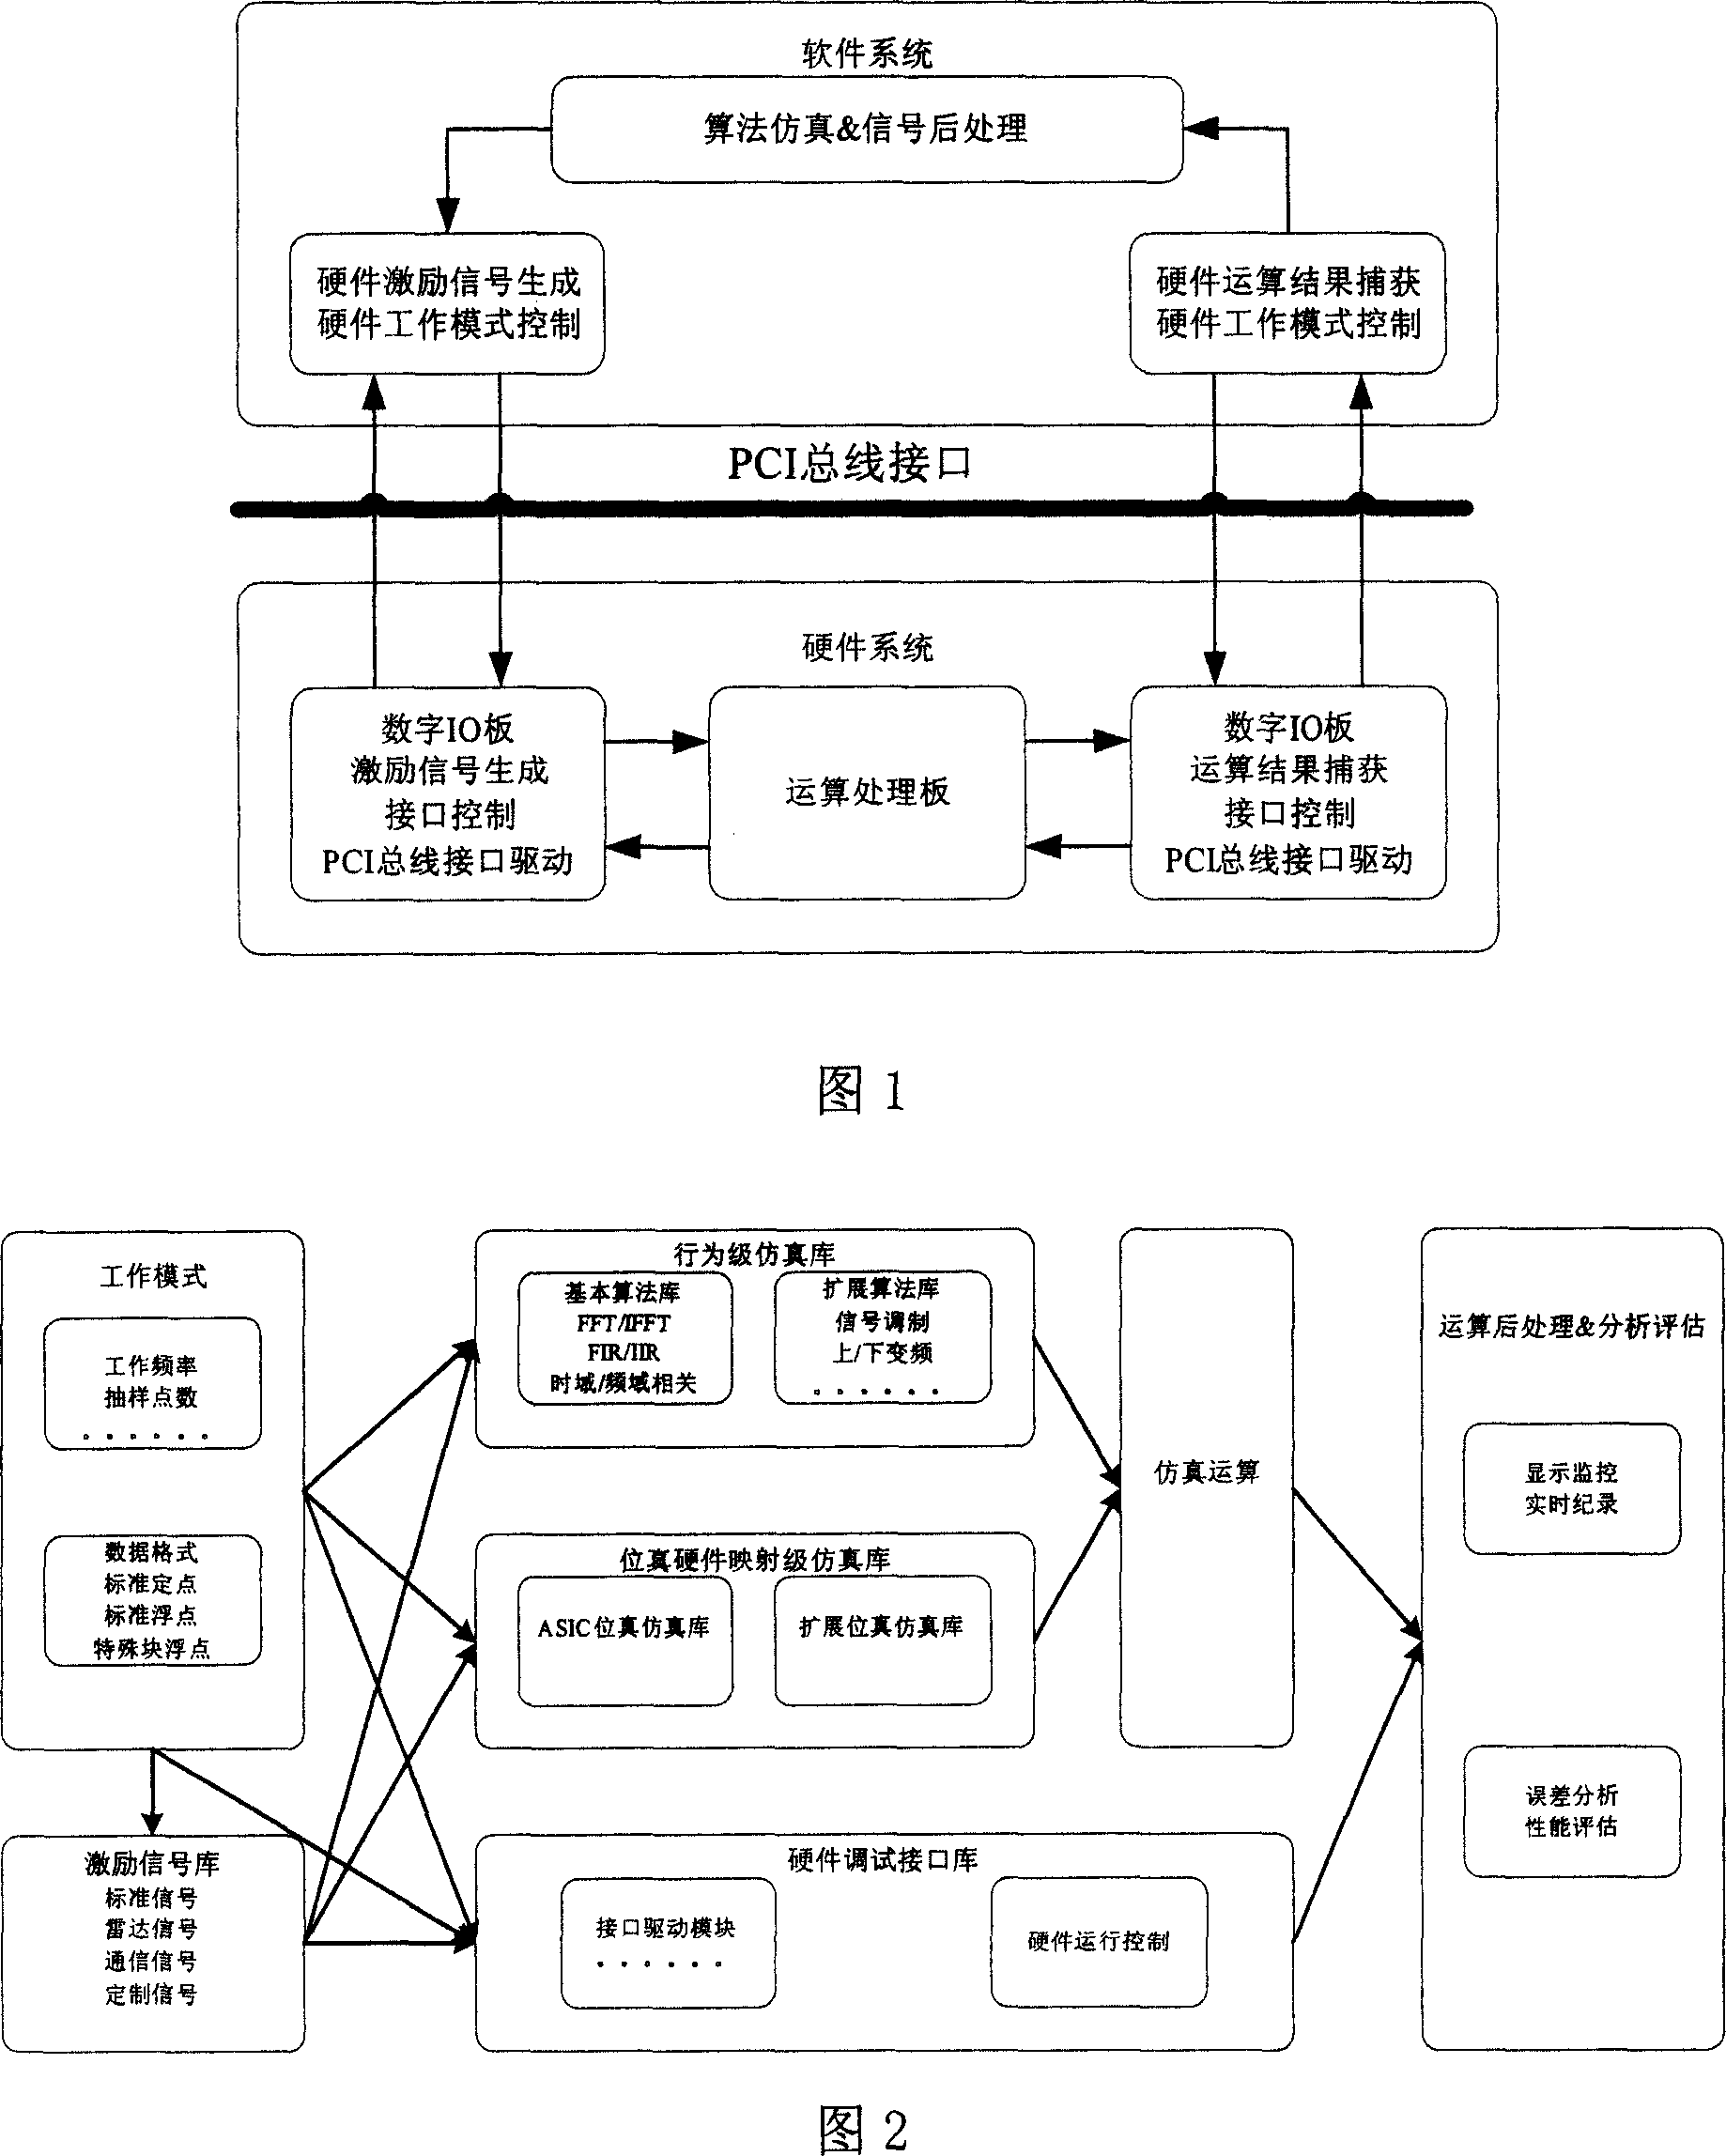 Real-time simulation development system and method therefor